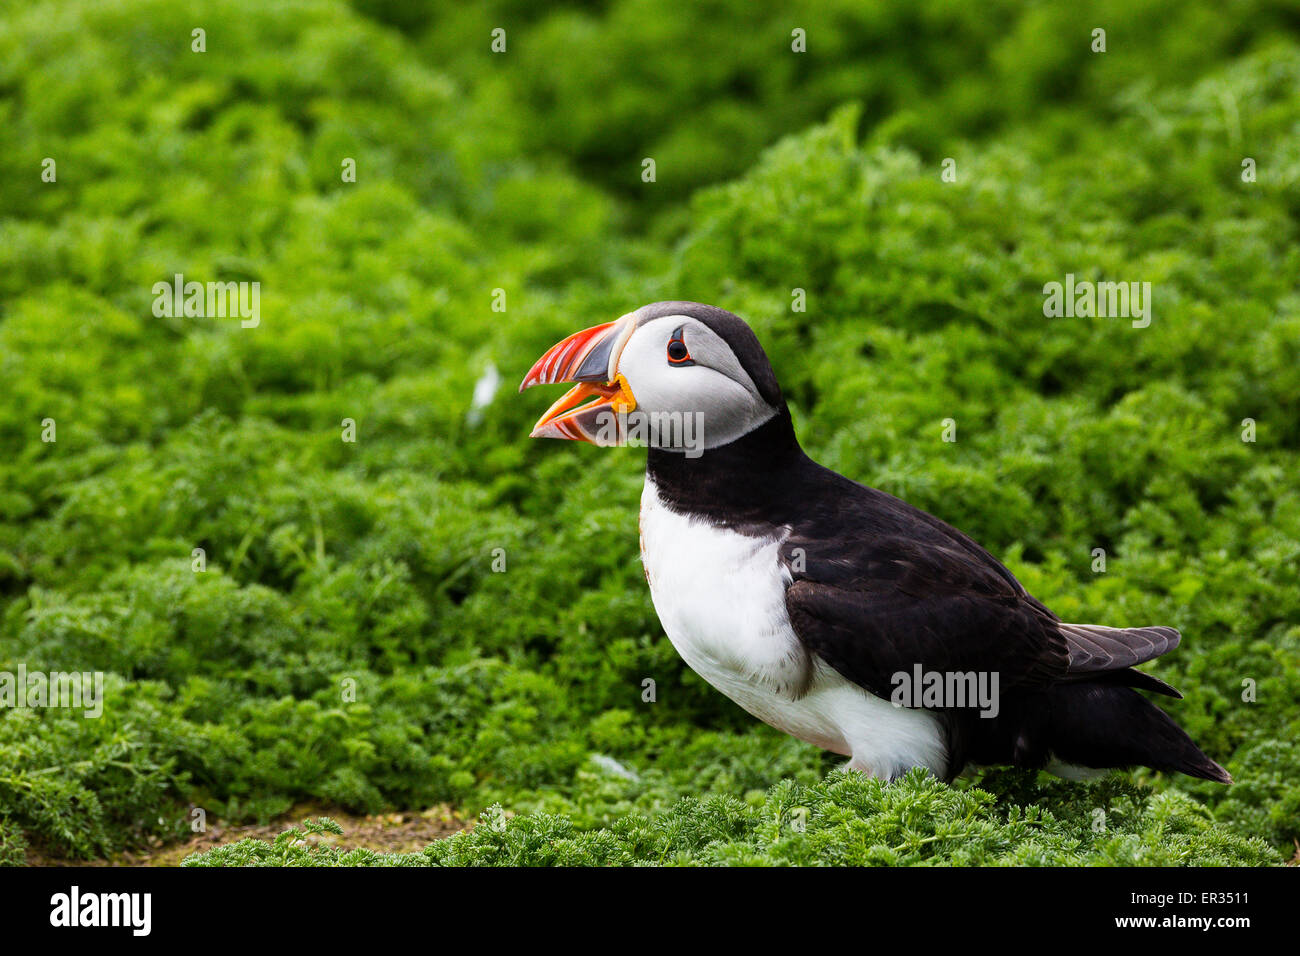 Pembrokeshire, Wales, UK. 24th May, 2015. Atlantic puffin calling on clifftop. Biologists have announced record numbers of Atlantic puffins living on Skomer. Over 21,000 individuals have been counted on the island. Puffins can be visited on Skomer from May to mid-July, with 500 people per day able to visit the small island off the west coast of Wales. Photographer comment: 'I've been photographing puffins on Skomer for years and they never cease to entertain, challenge, and infuriate. Credit:  Dave Stevenson/Alamy Live News Stock Photo